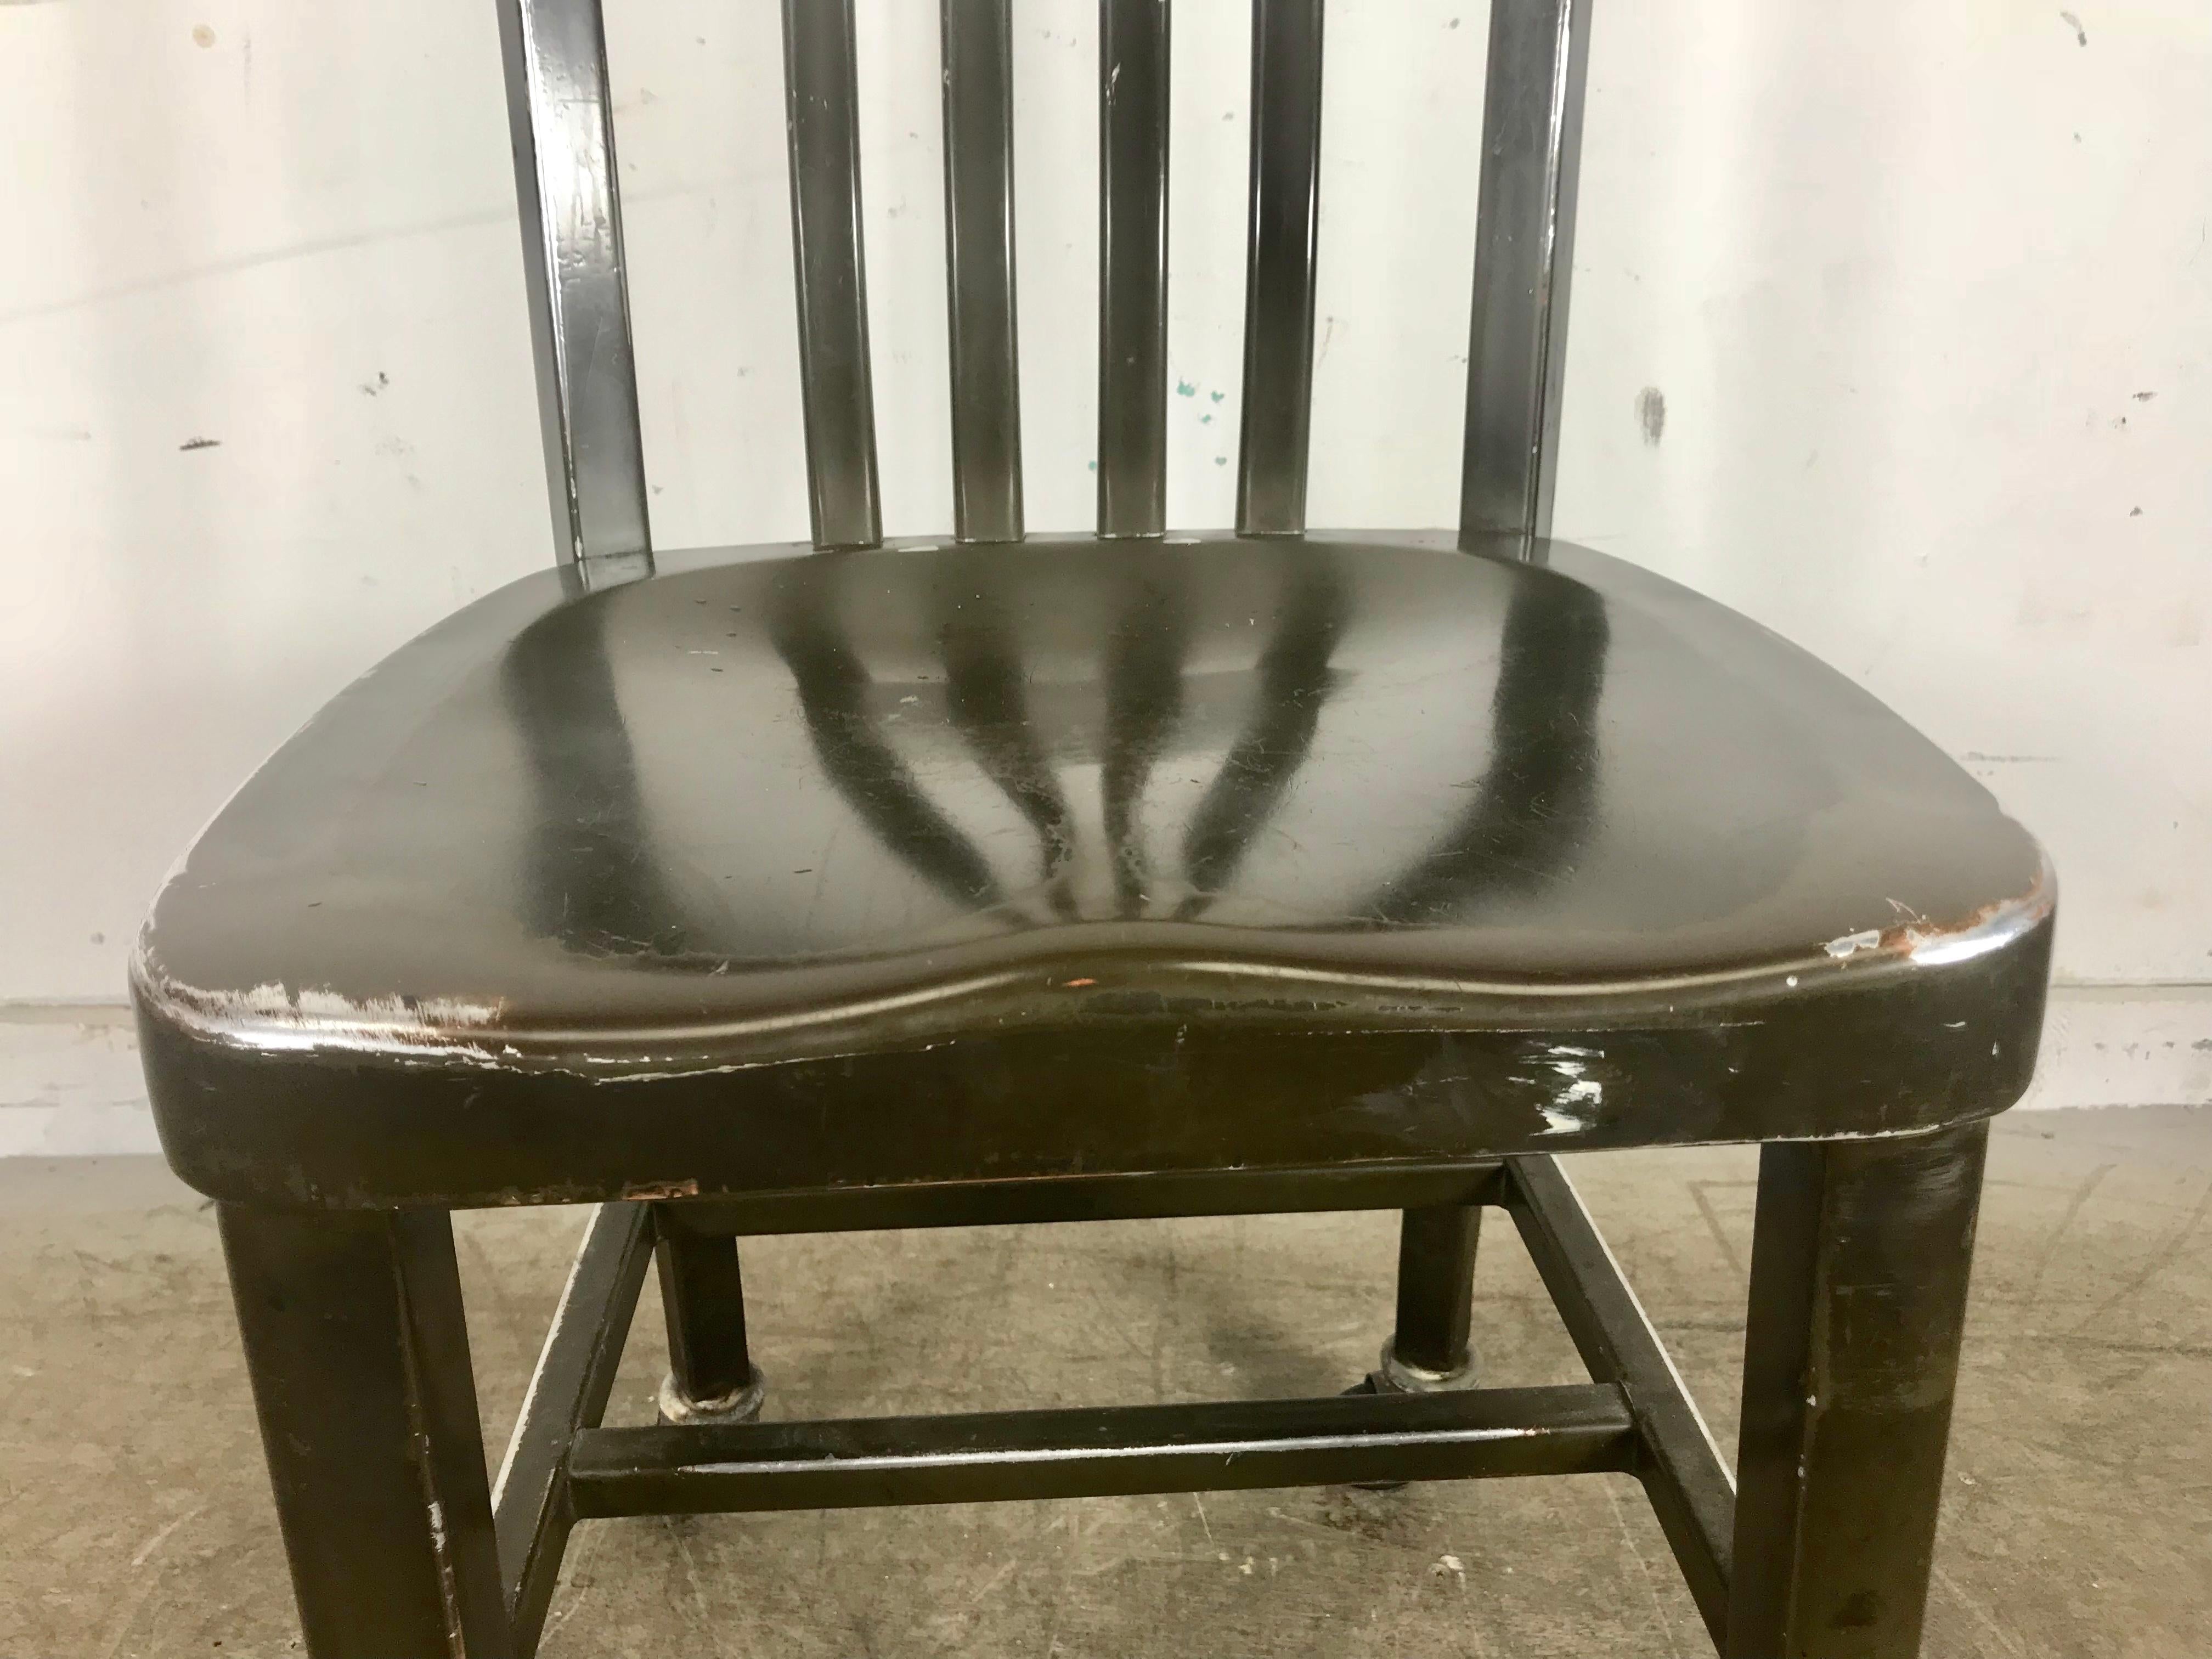 Antique Industrial Aluminum Rolling Desk Chair by General Fireproofing Co. In Good Condition For Sale In Buffalo, NY